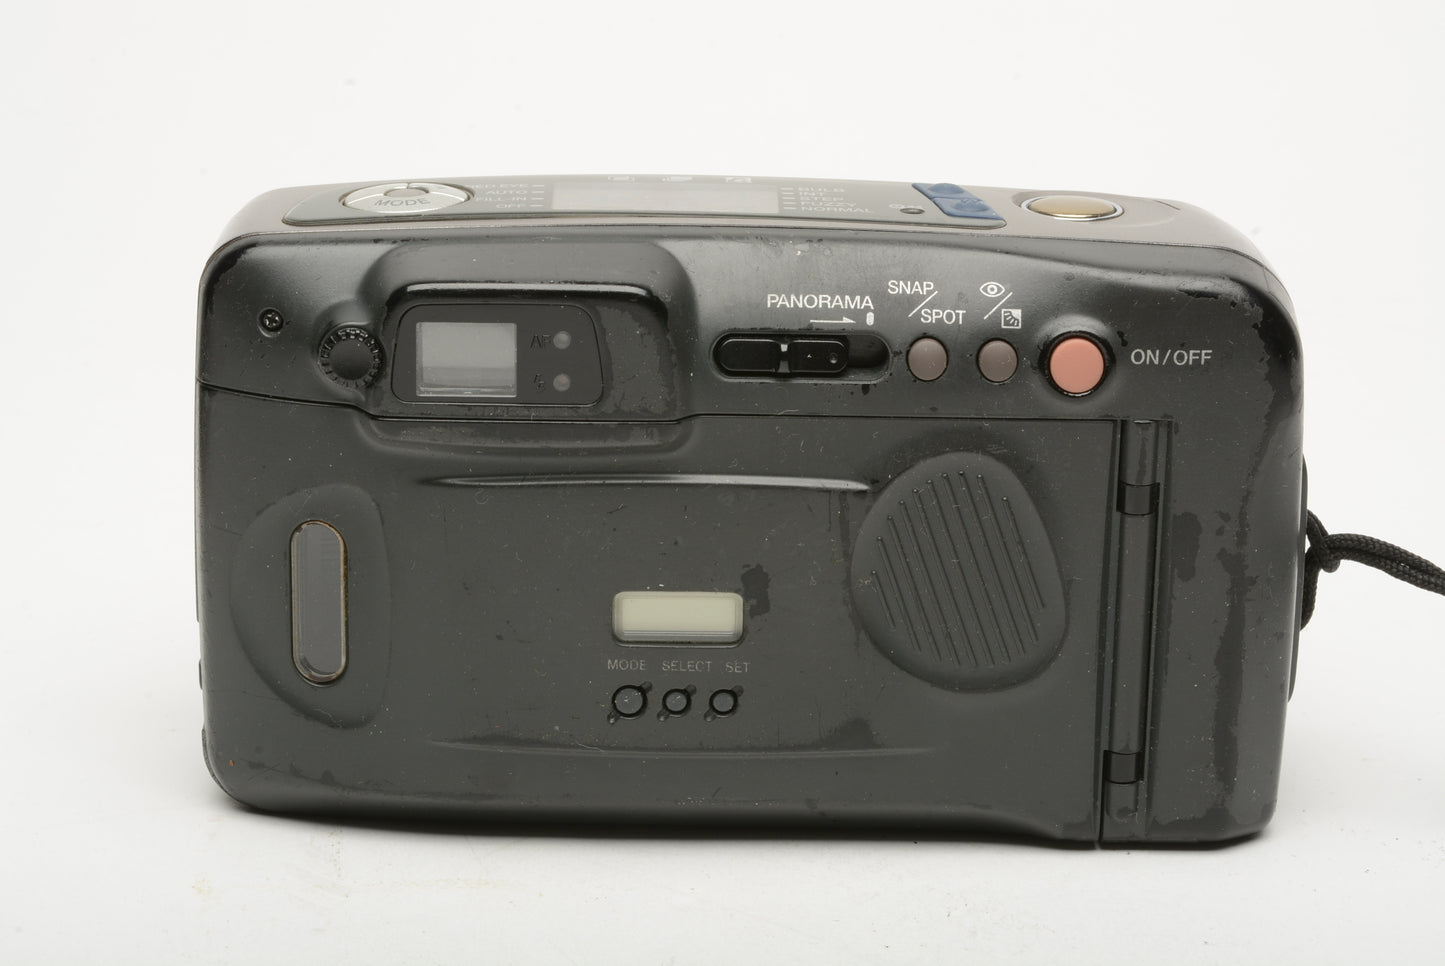 Samsung Maxima Zoom 145 date pano 35mm Point&Shoot Camera, case, well used, works